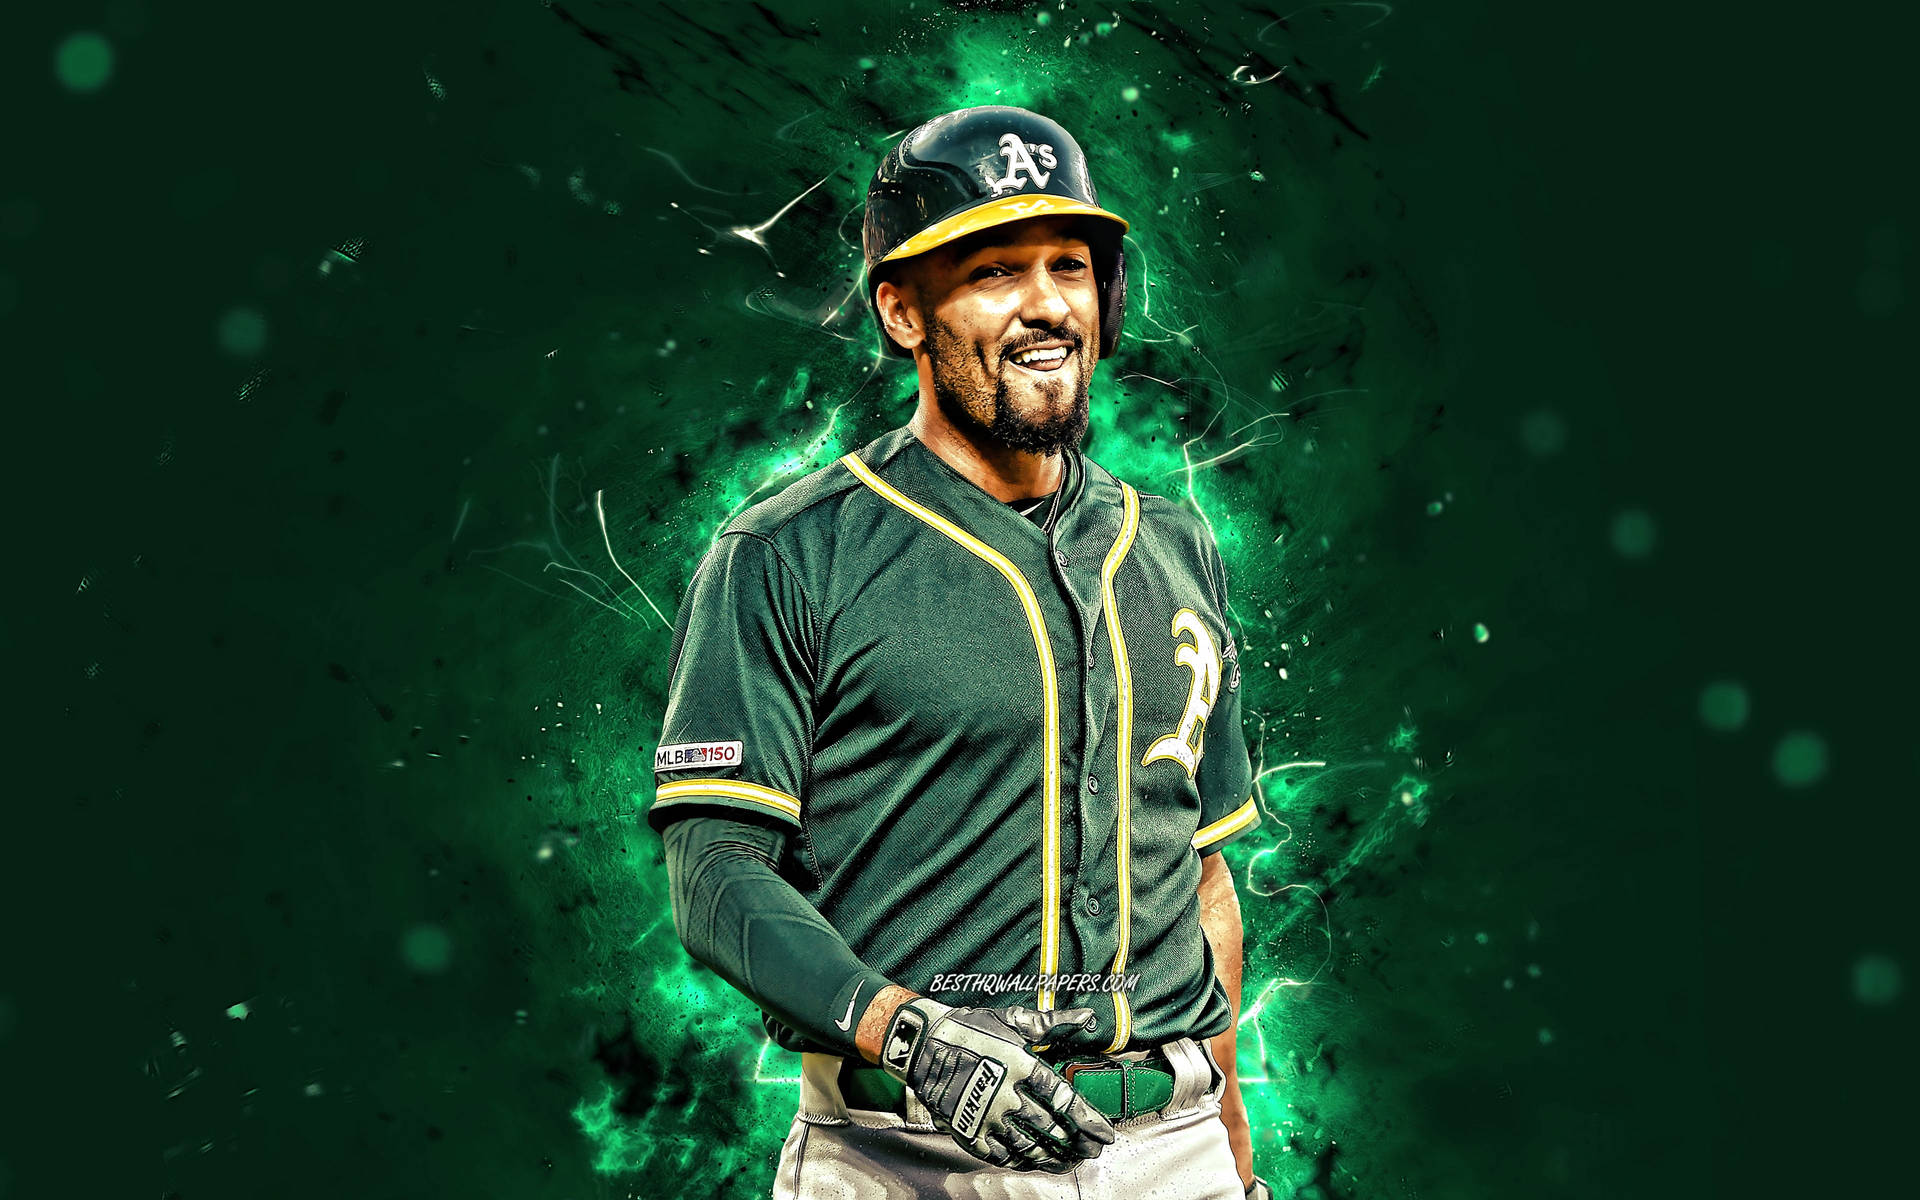 Oakland Athletics Wallpapers (68+ pictures)